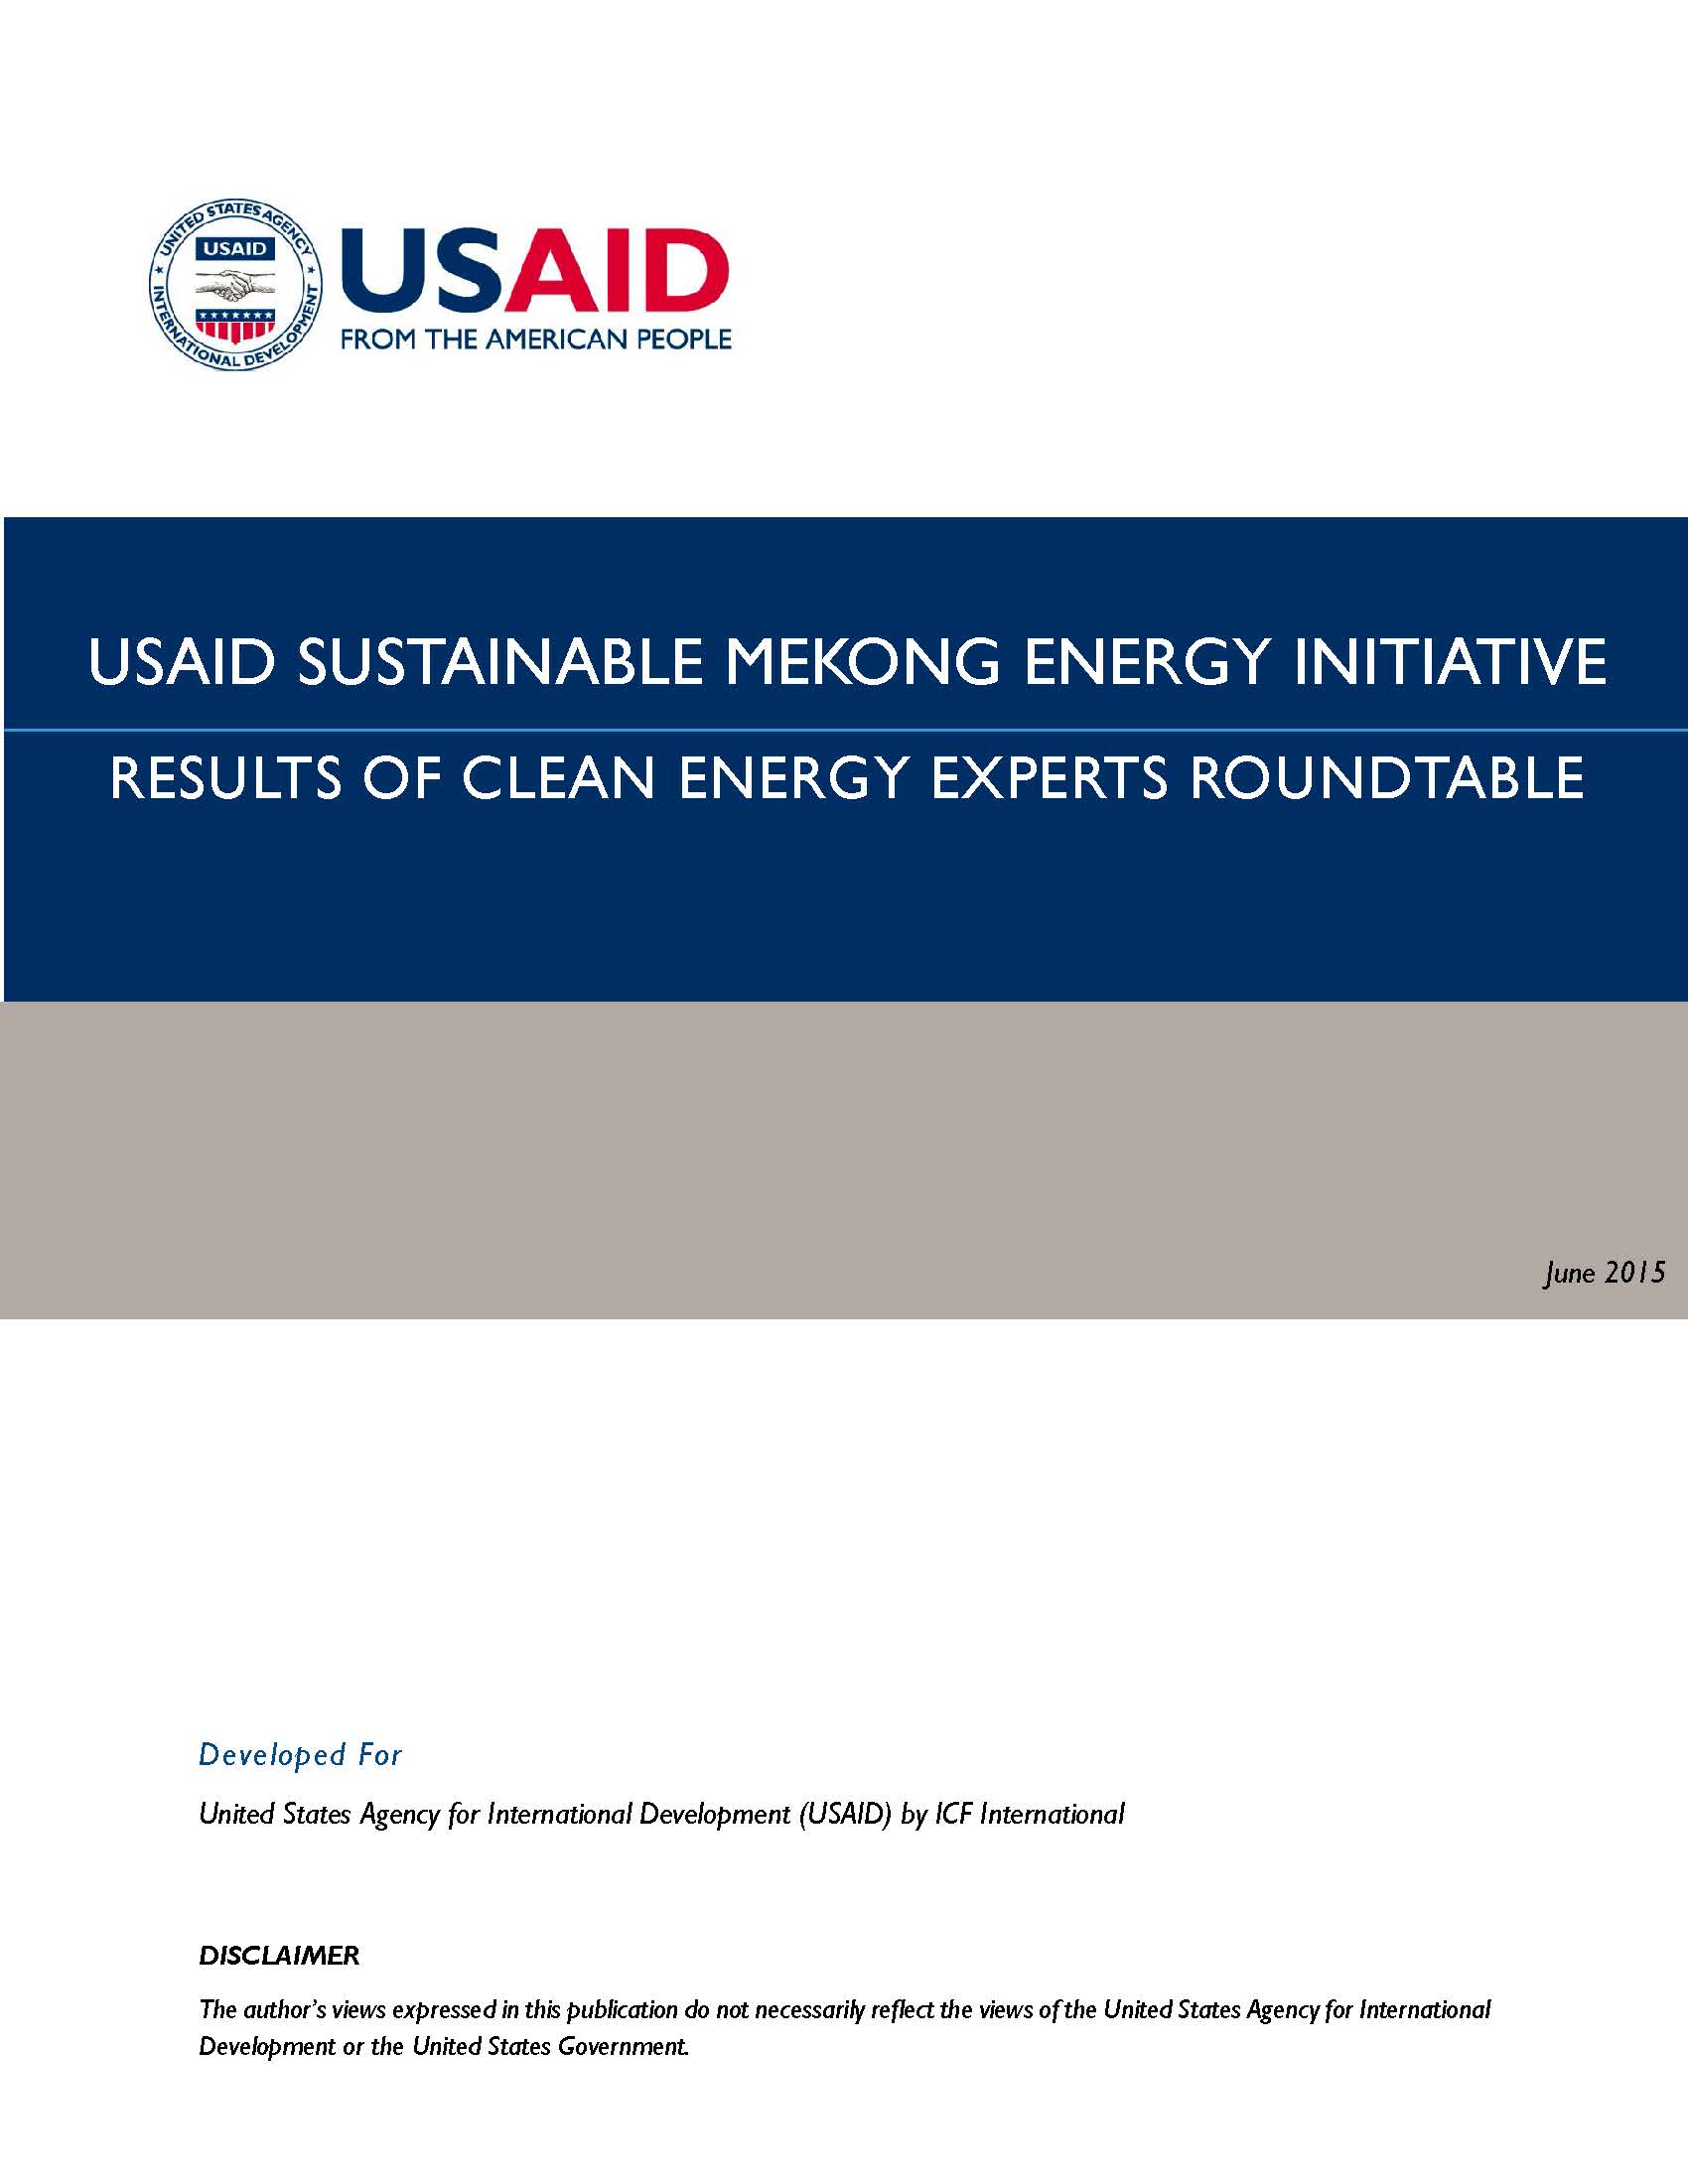 USAID Sustainable Mekong Energy Initiative Results of Clean Energy Experts Roundtable